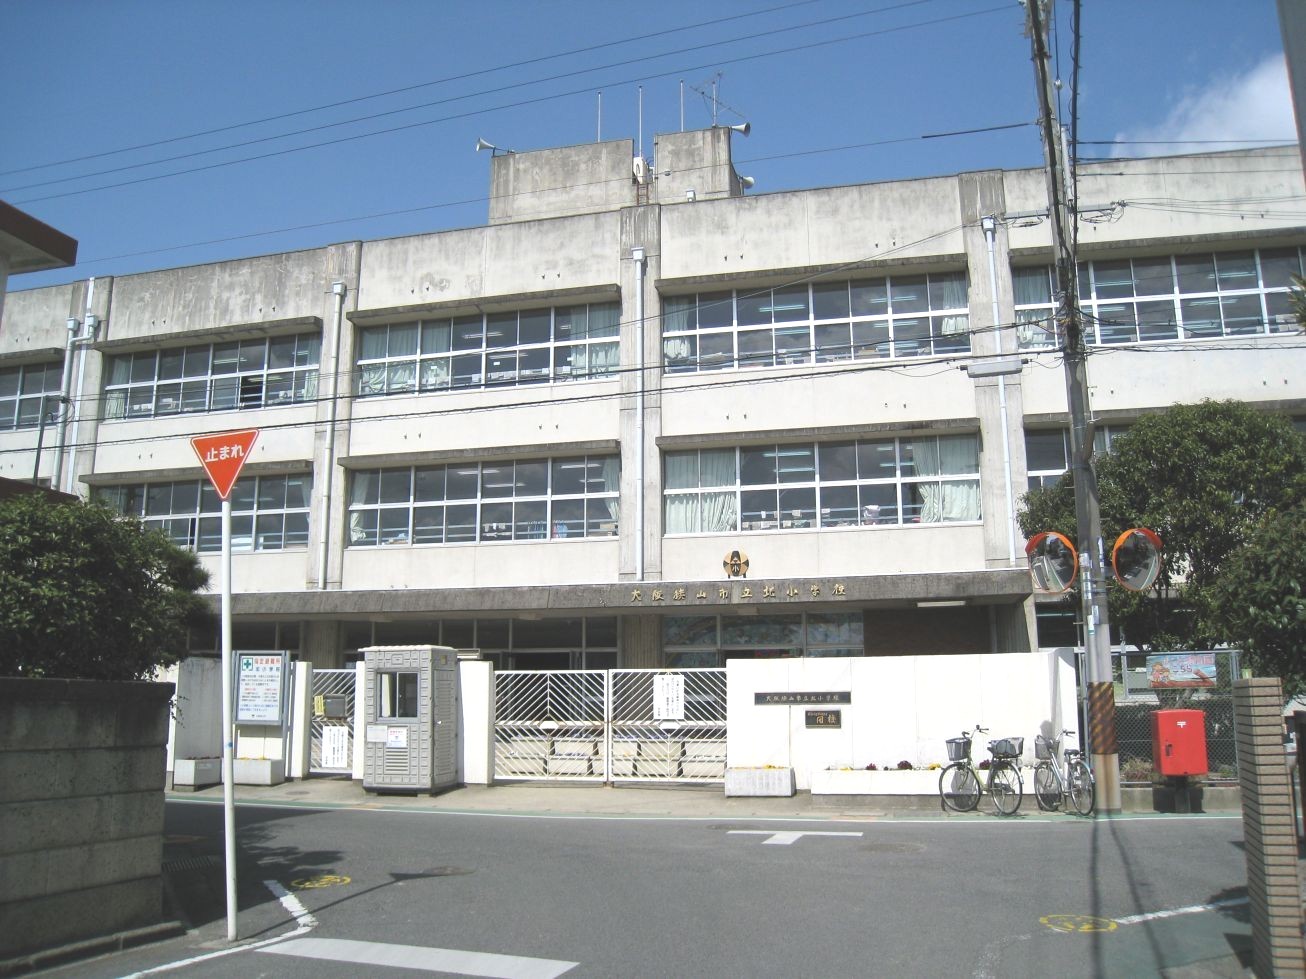 Primary school. Trade mark is 310m blue hat to Osakasayama Tatsukita Elementary School. You can commute to choose a few streets of car street